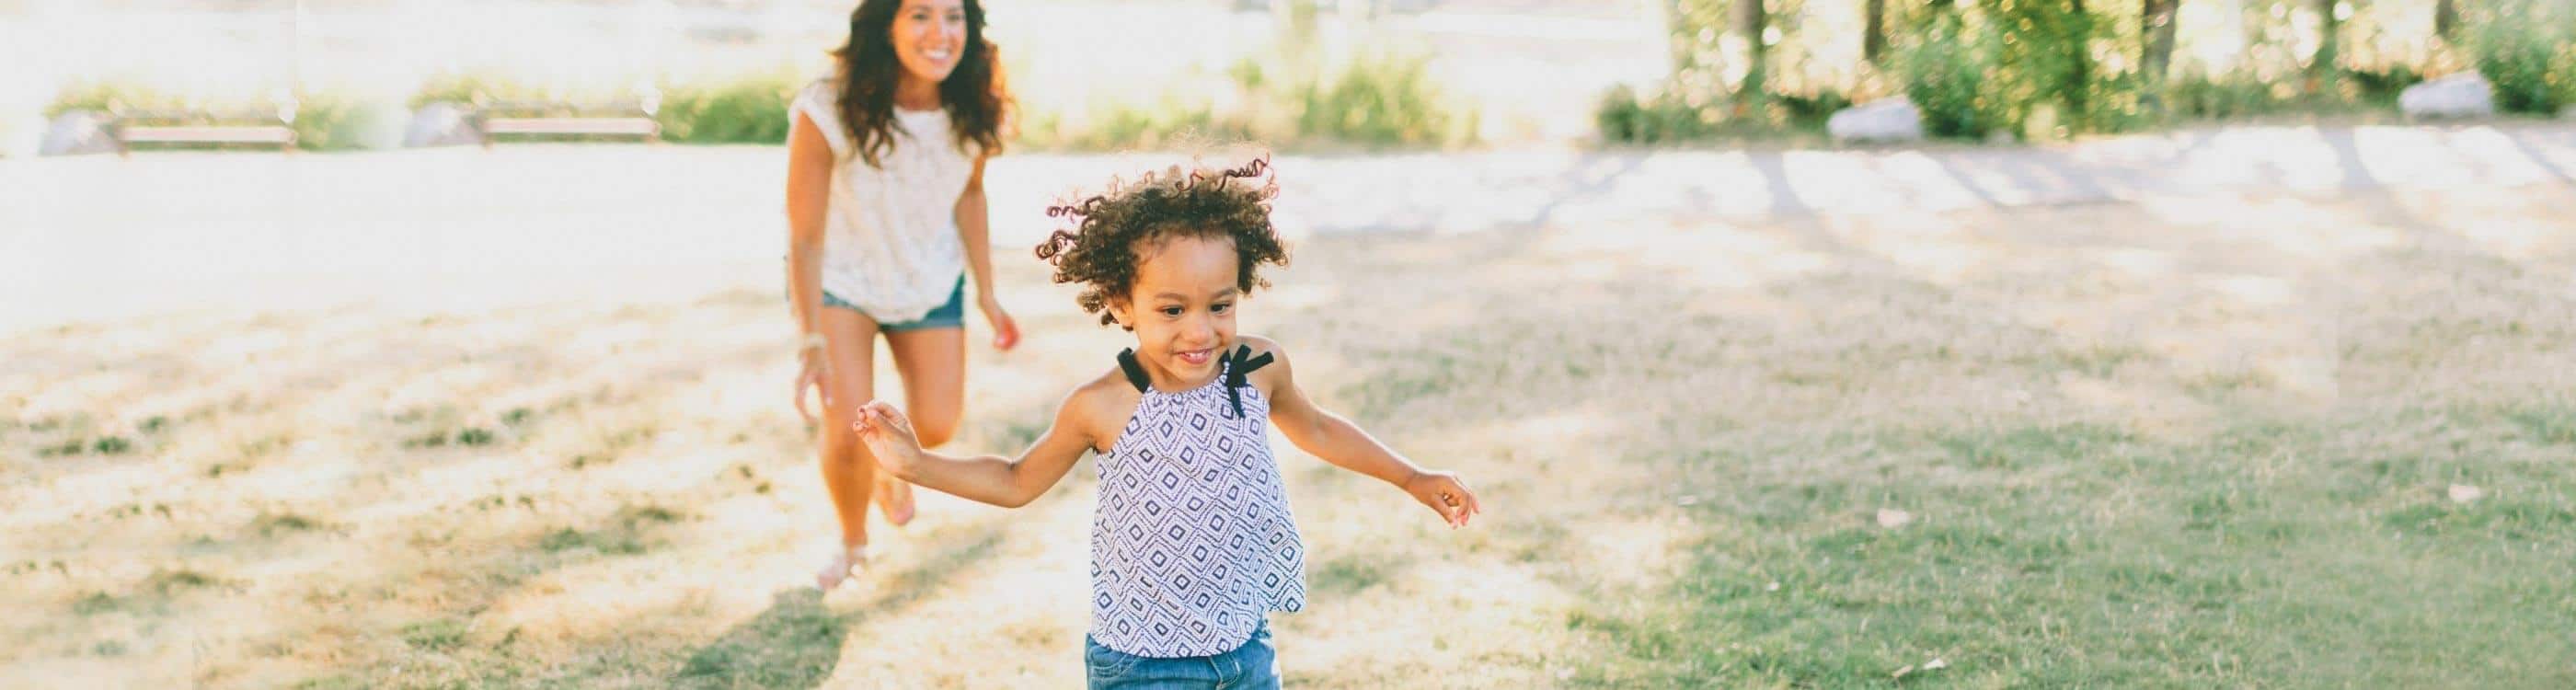 Young girl smilng as she runs from her mother